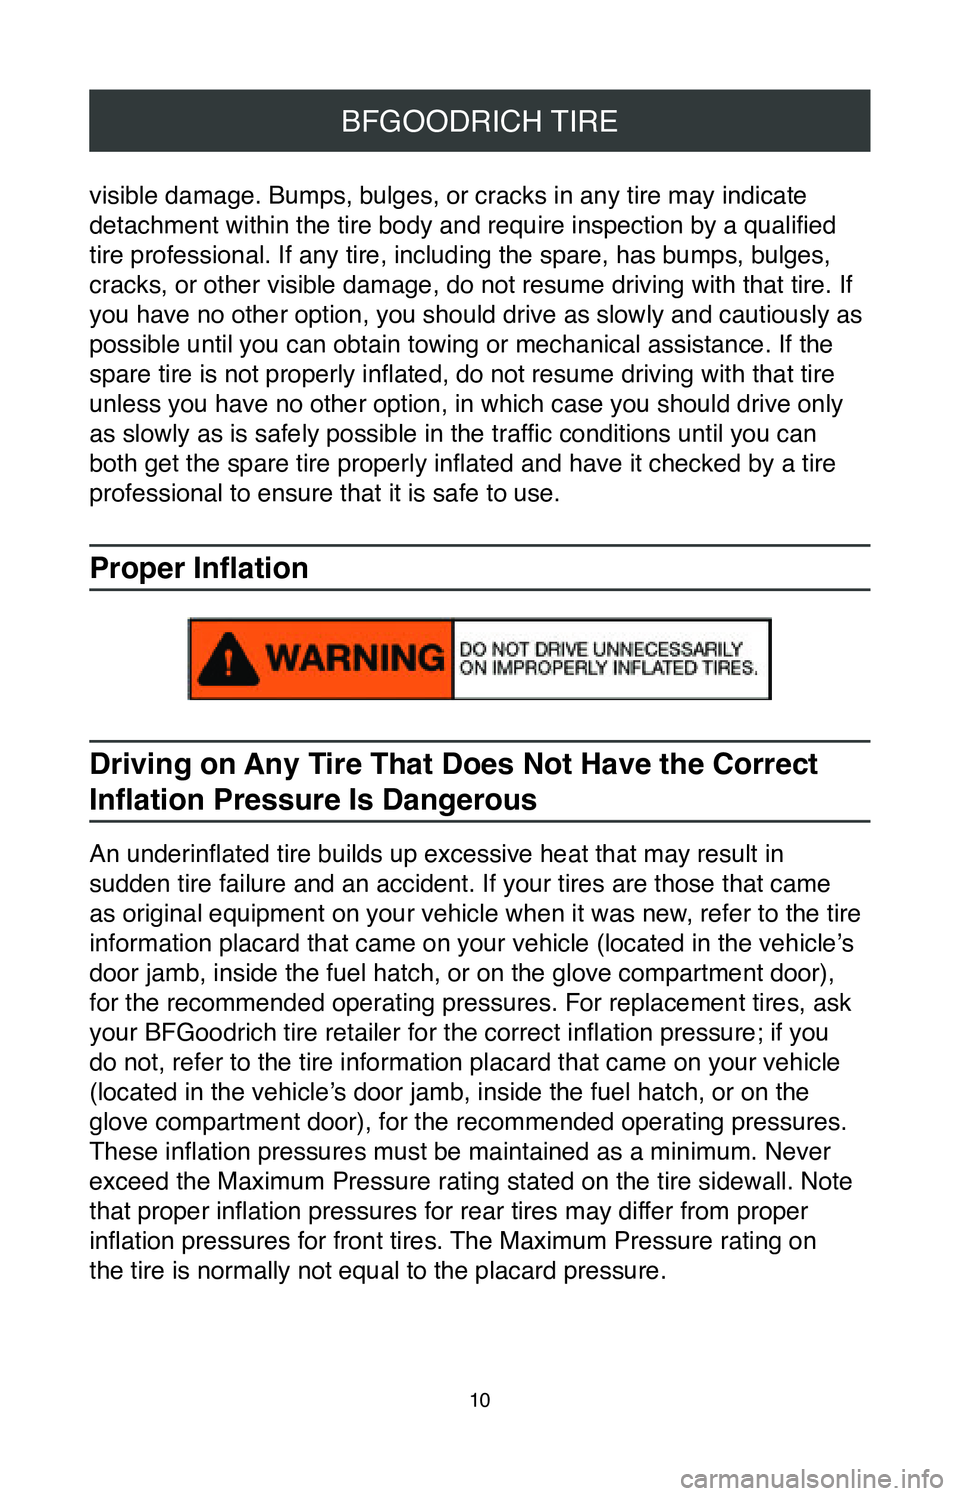 TOYOTA AVALON HYBRID 2020  Warranties & Maintenance Guides (in English) 10
BFGOODRICH TIRE
visible damage. Bumps, bulges, or cracks in any tire may indicate 
detachment within the tire body and require inspection by a qualified 
tire professional. If any tire, including t